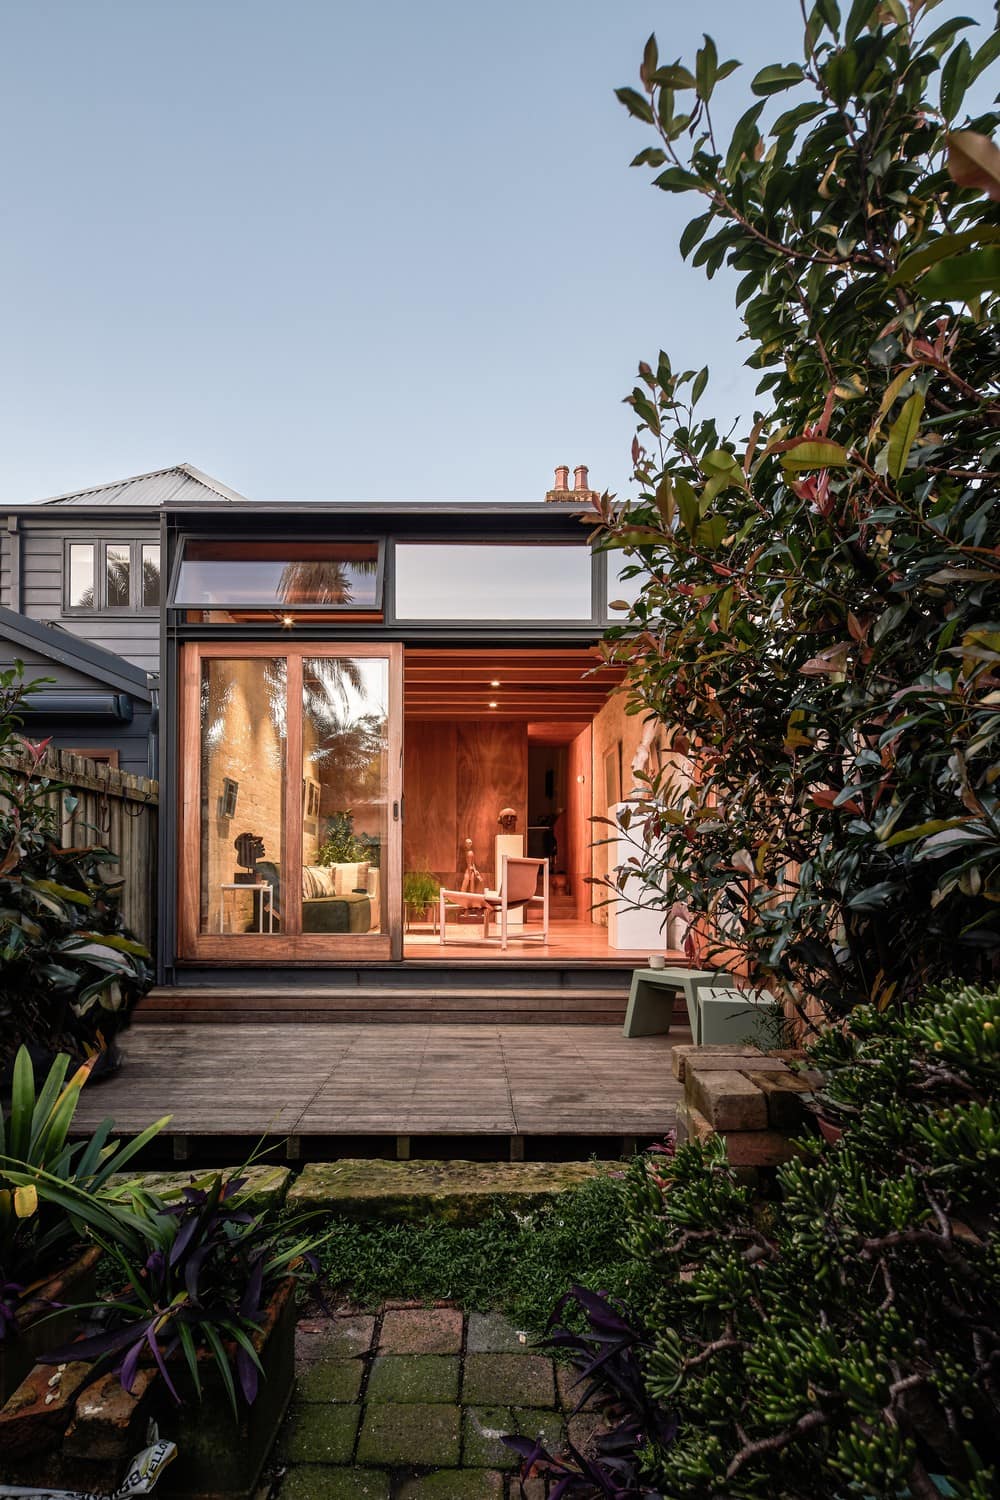 House for a Sculptor / Miles Thorp Architects